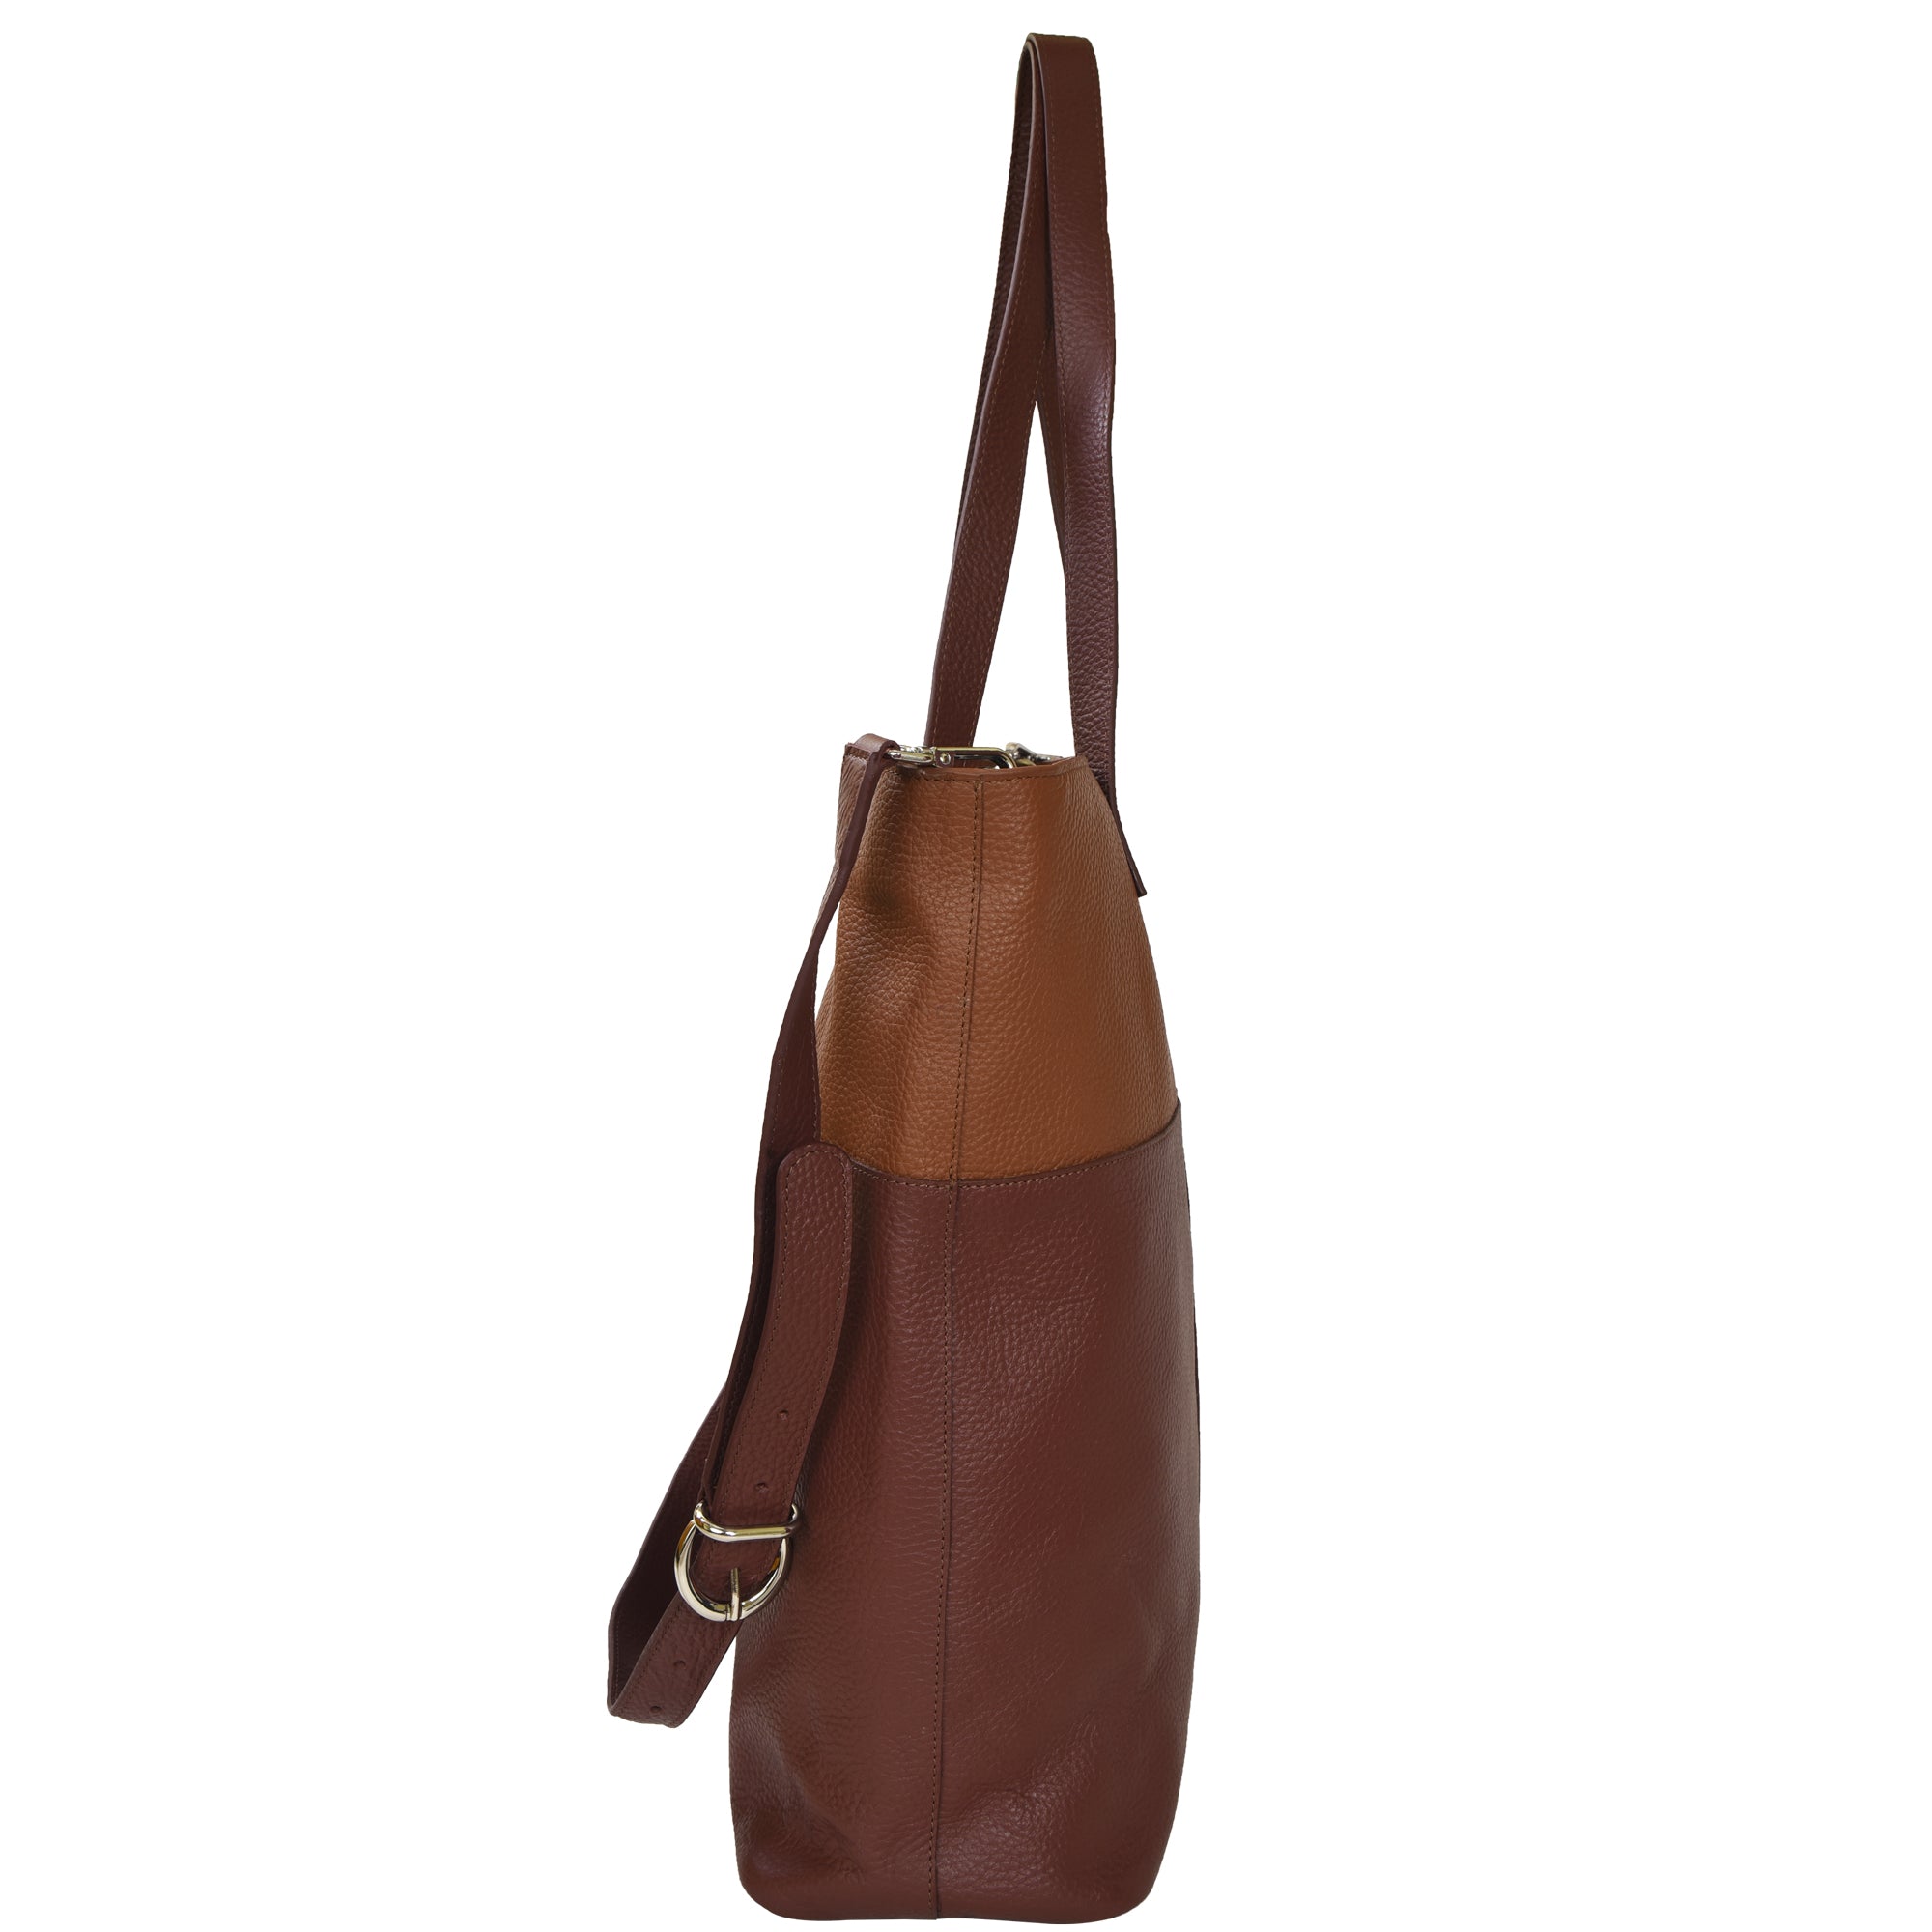 Chocolate And Camel Two Tone Leather Tote